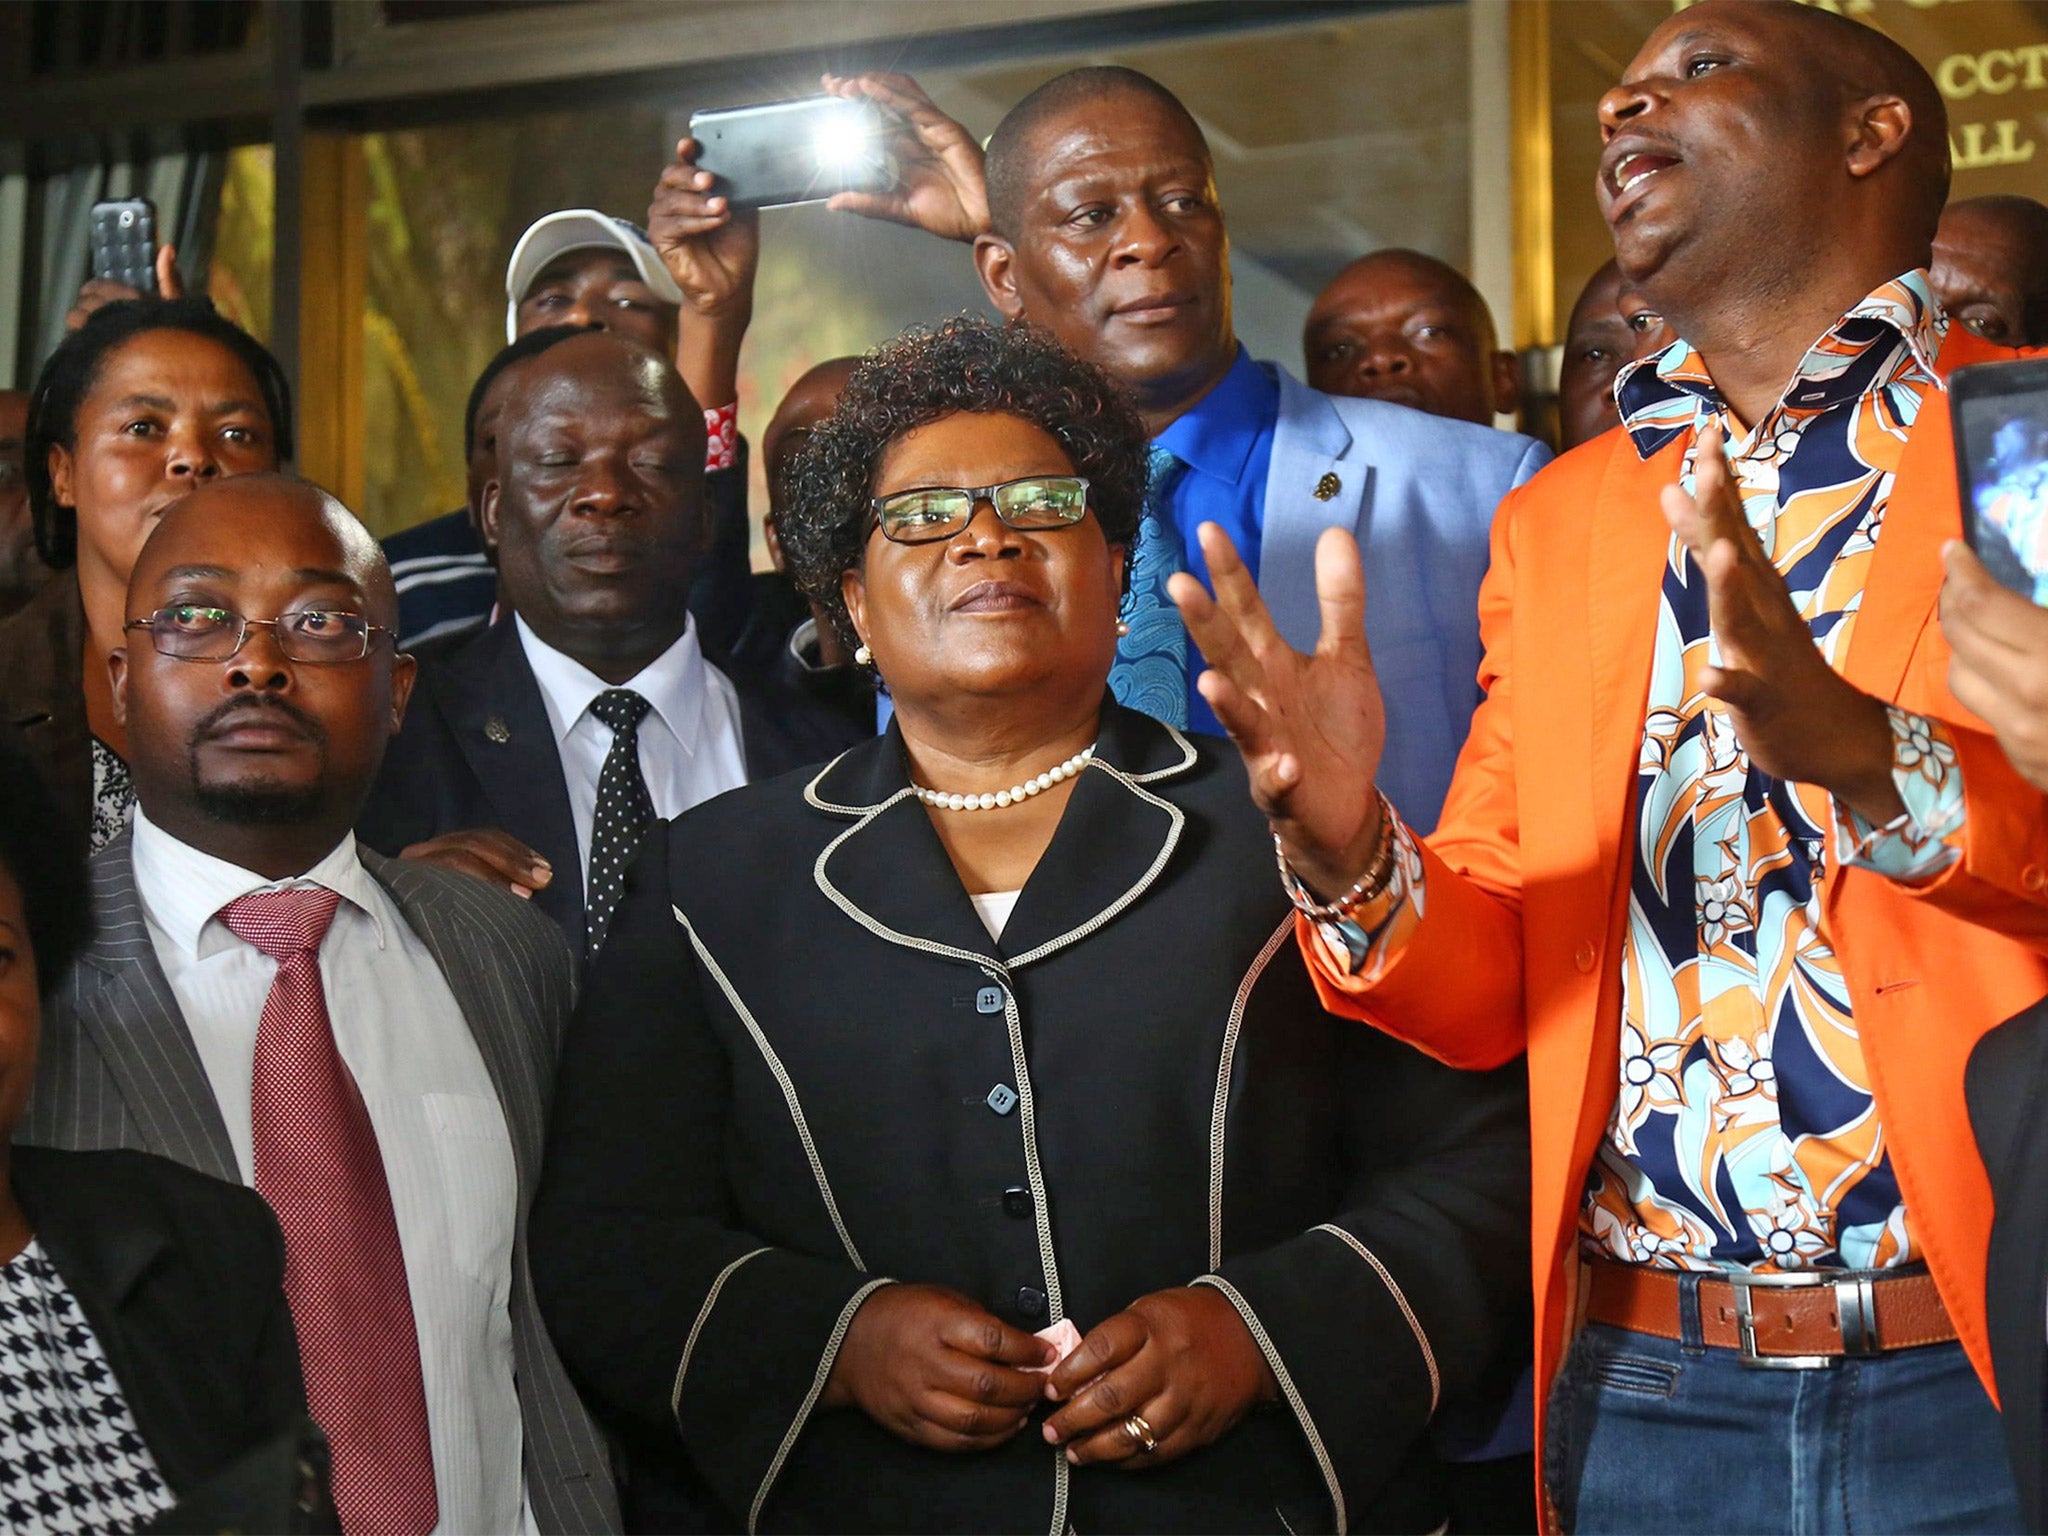 Zimbabwe’s former Vice-President Joice Mujuru with supporters at a press conference in Harare